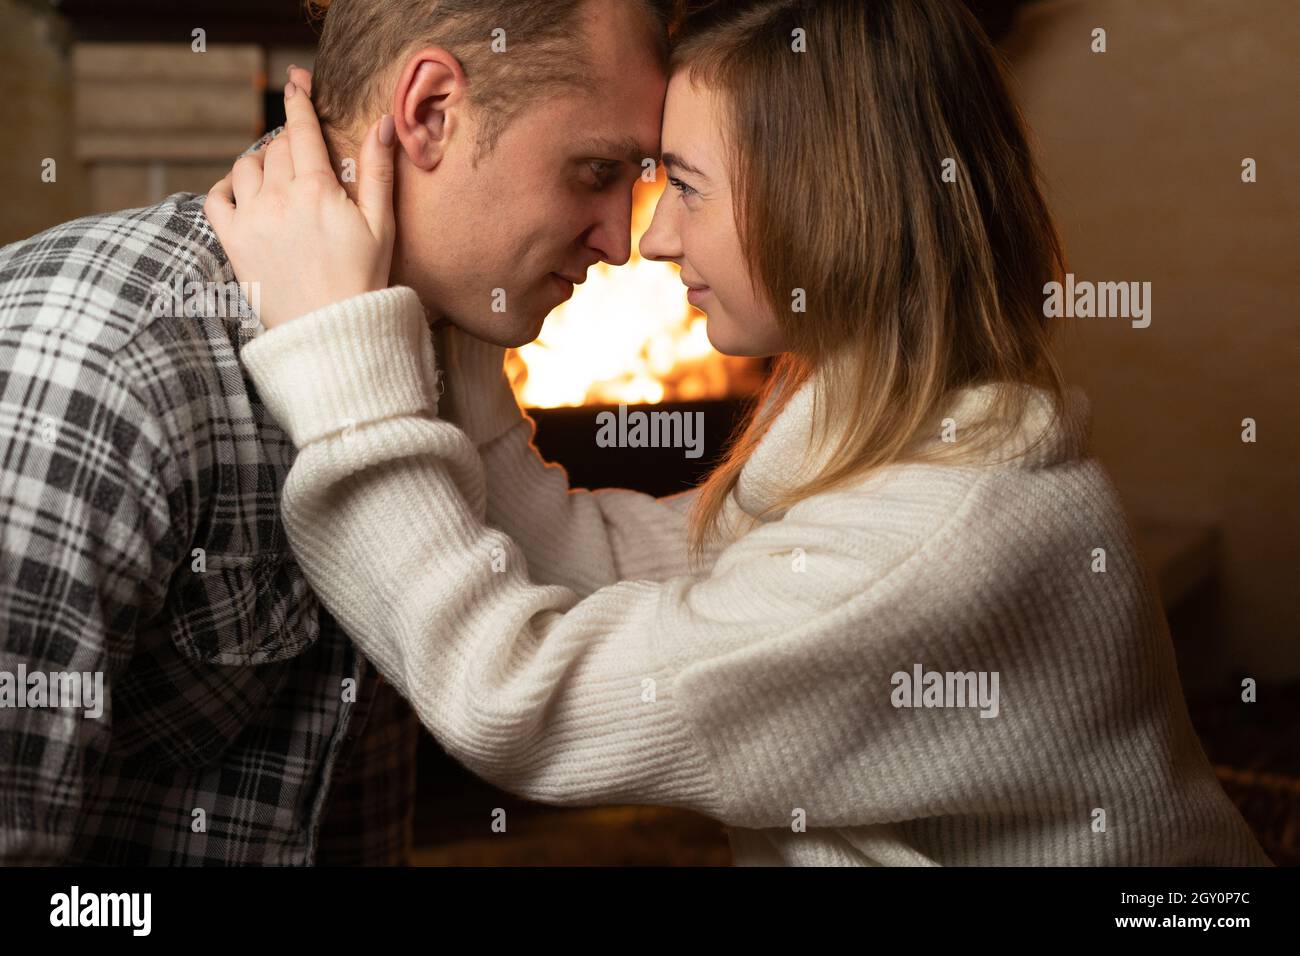 Portrait of a man and a woman embracing his neck. Love and romance. Young family and holidays concept. Stock Photo